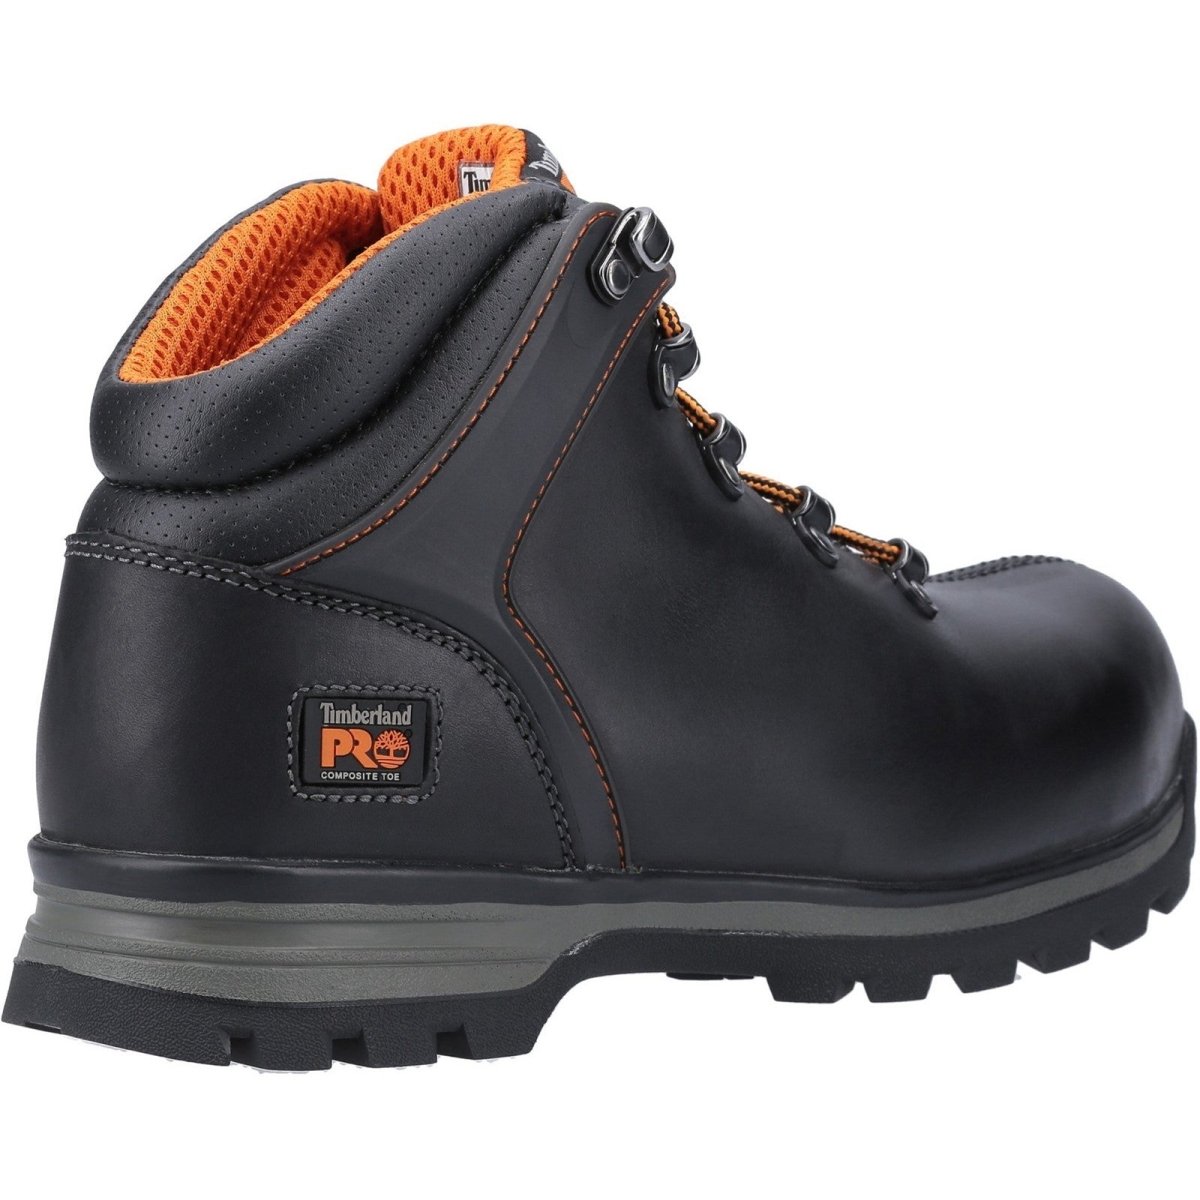 Timberland Pro Splitrock XT Composite Safety Toe Work Boot - Shoe Store Direct